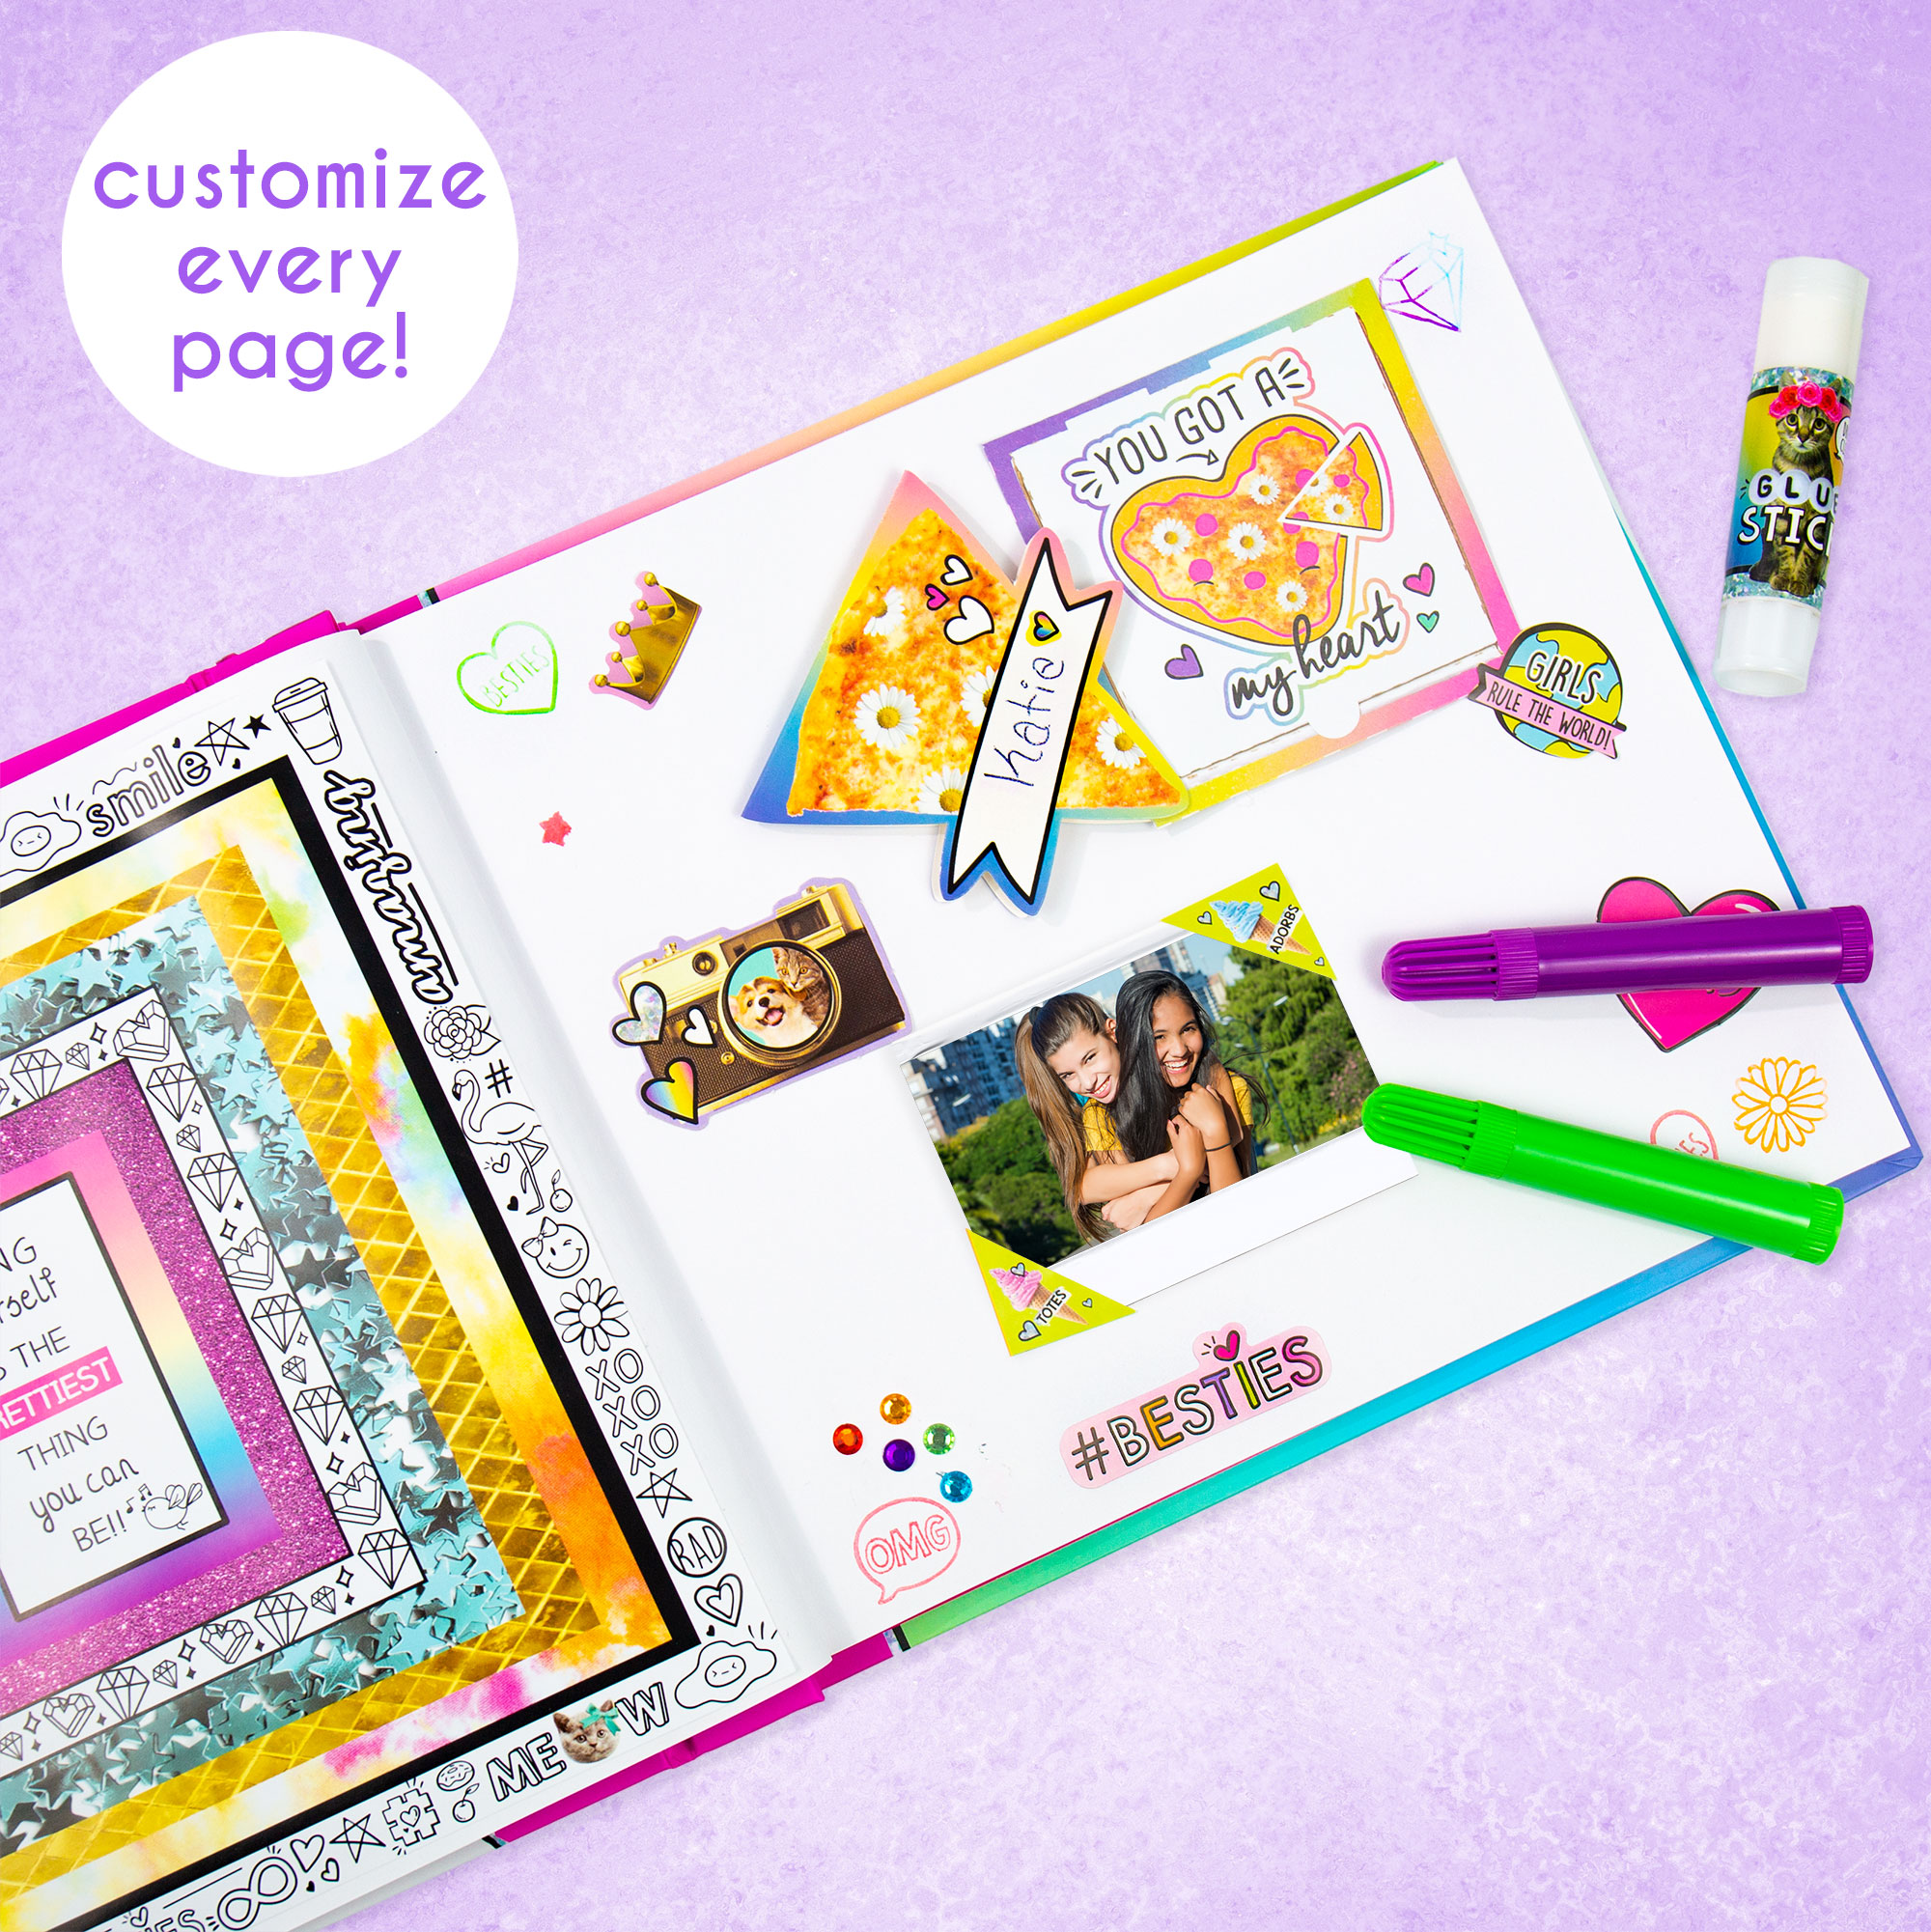 Just My Style Doodle Your Own Scrapbook & Cards, Arts & Crafts Kit, 6+ - image 3 of 6